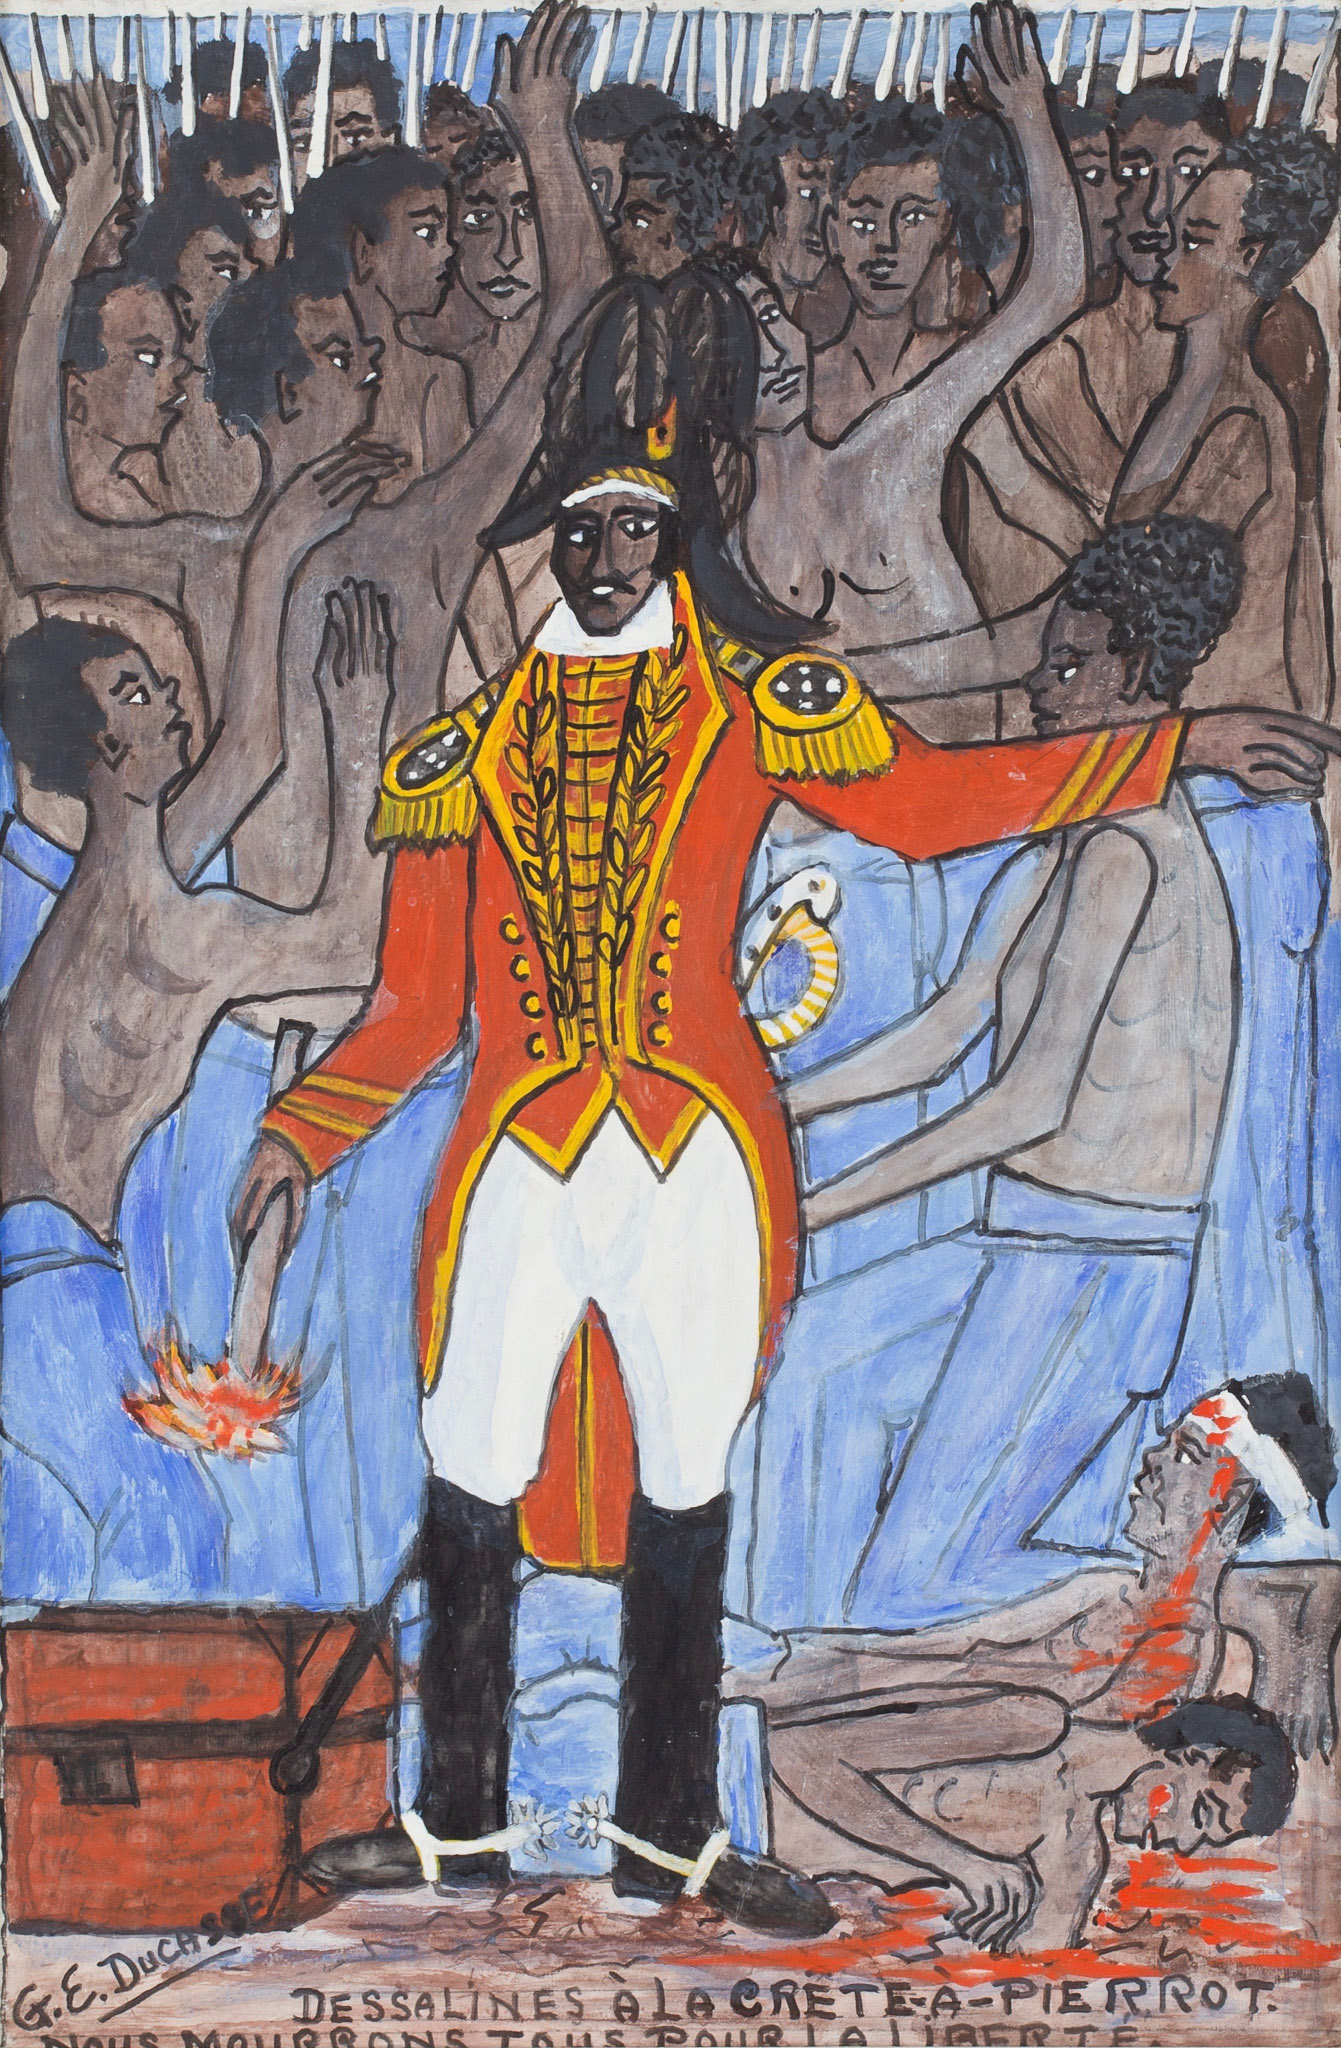 Dessalines At La Crete-A-Pierrot.  We Will All Die For Freedom, 1974